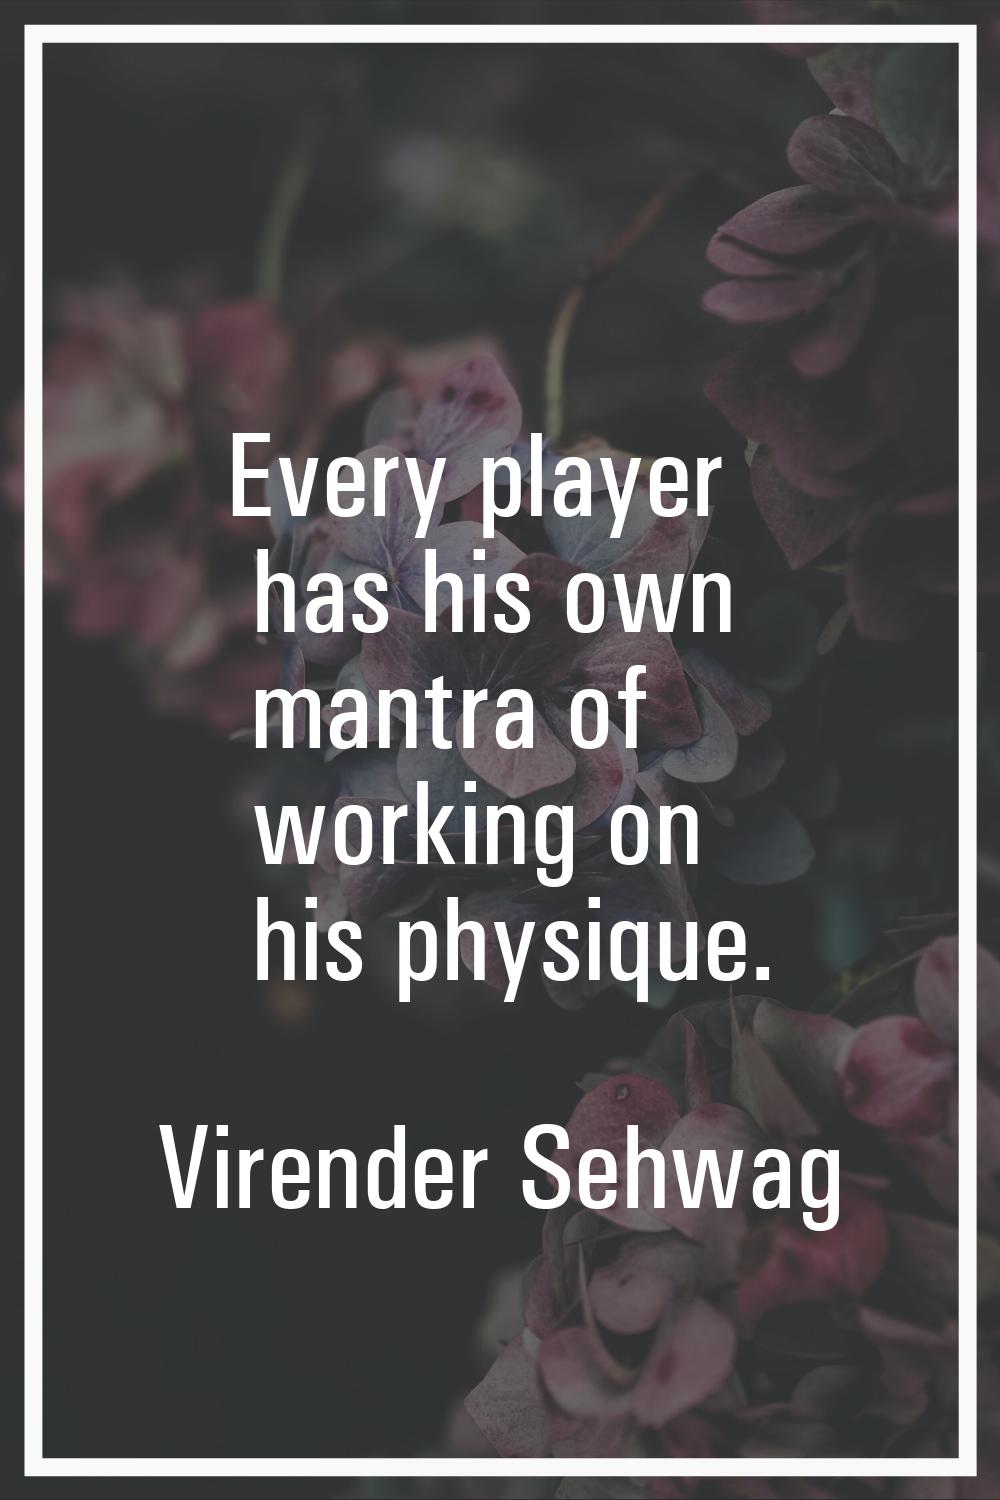 Every player has his own mantra of working on his physique.